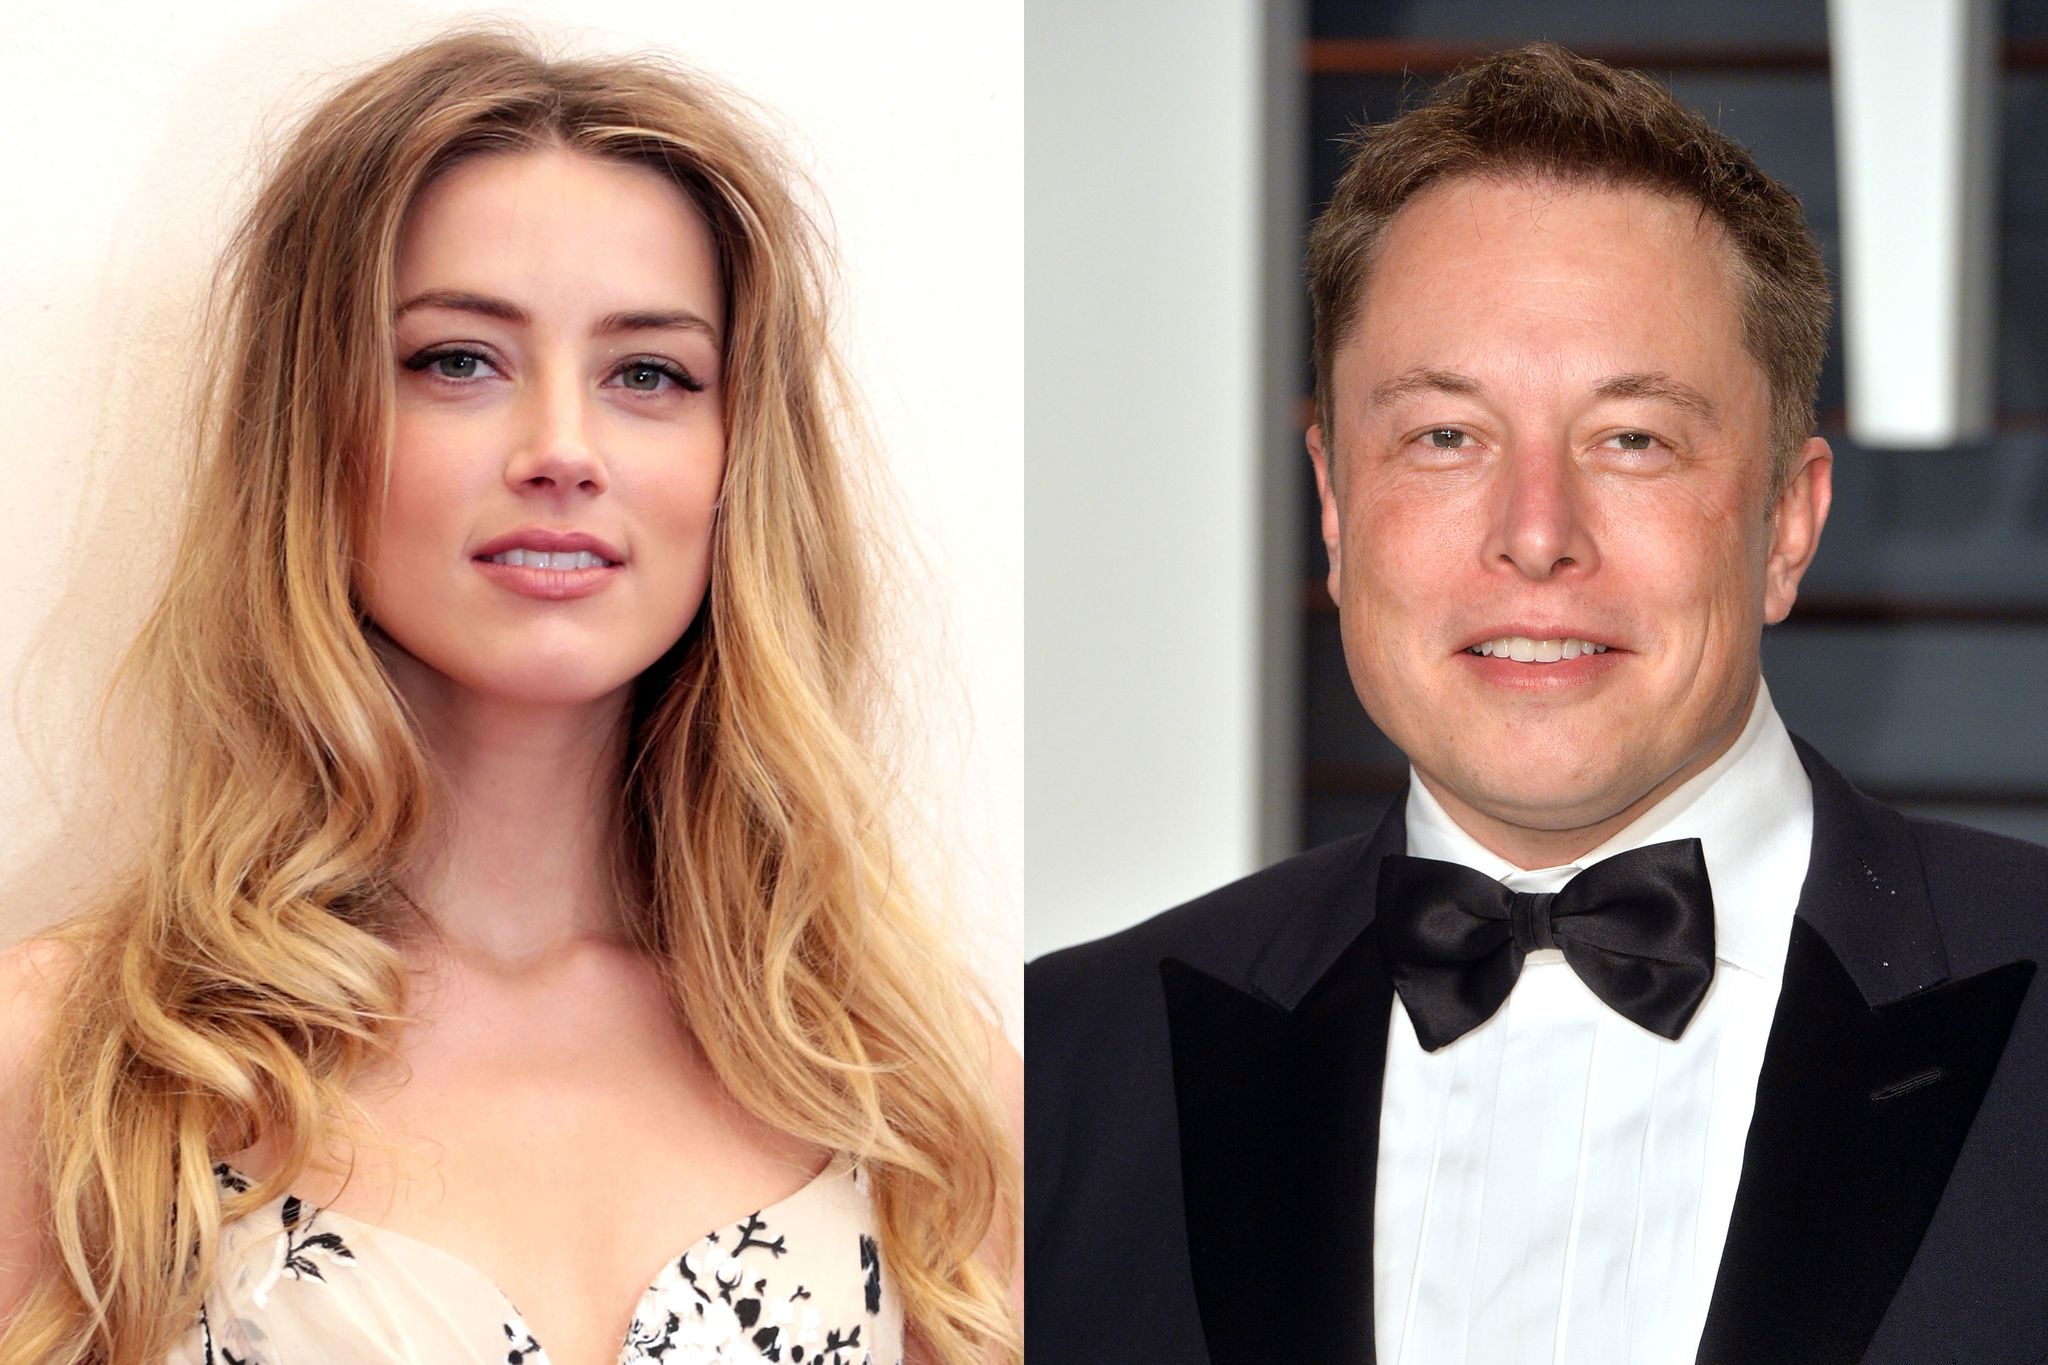 Elon Musk and Amber Heard: A Story of a Tough Relationship